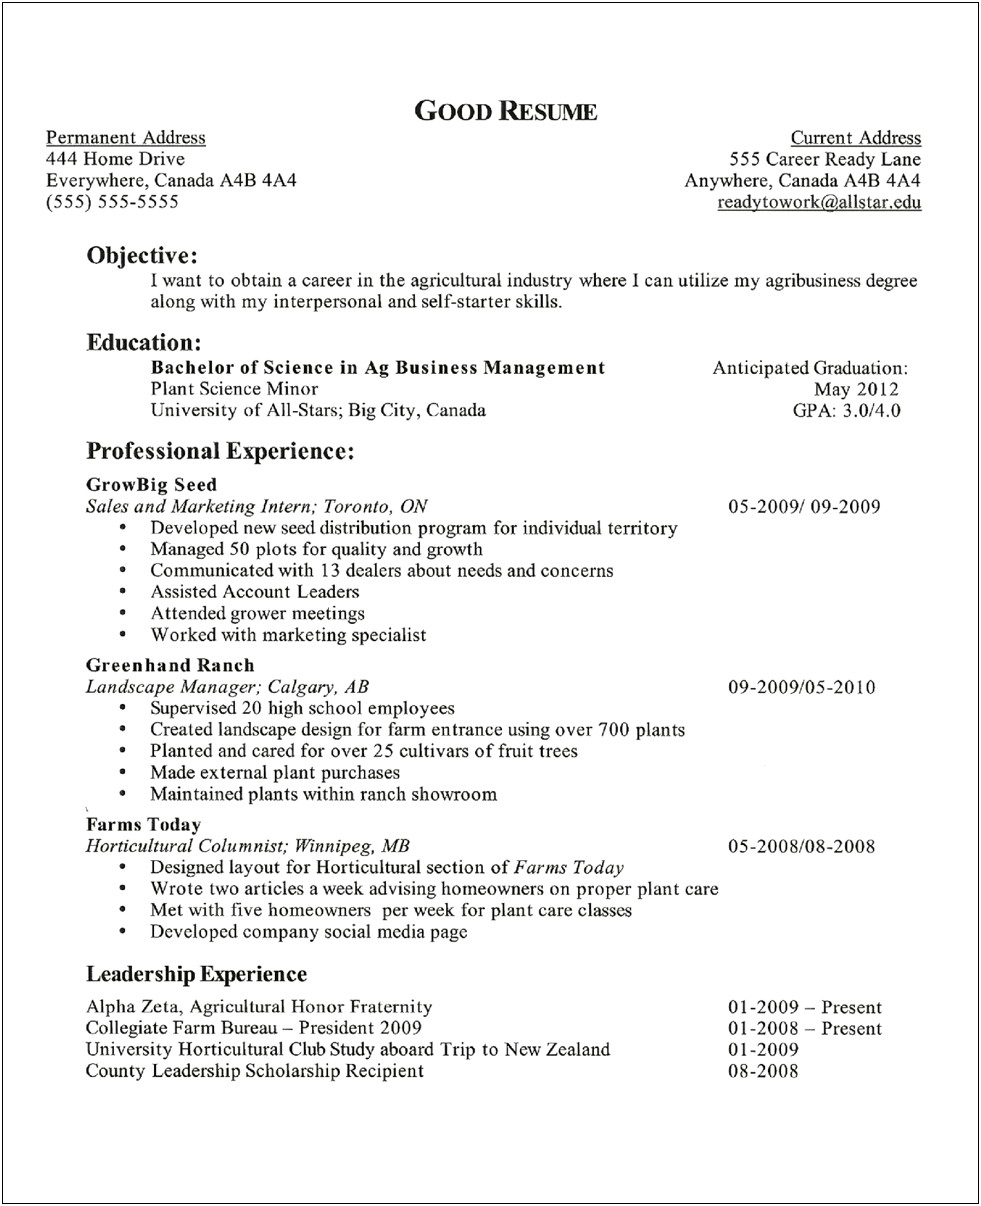 General Resume Objective Examples High School Student